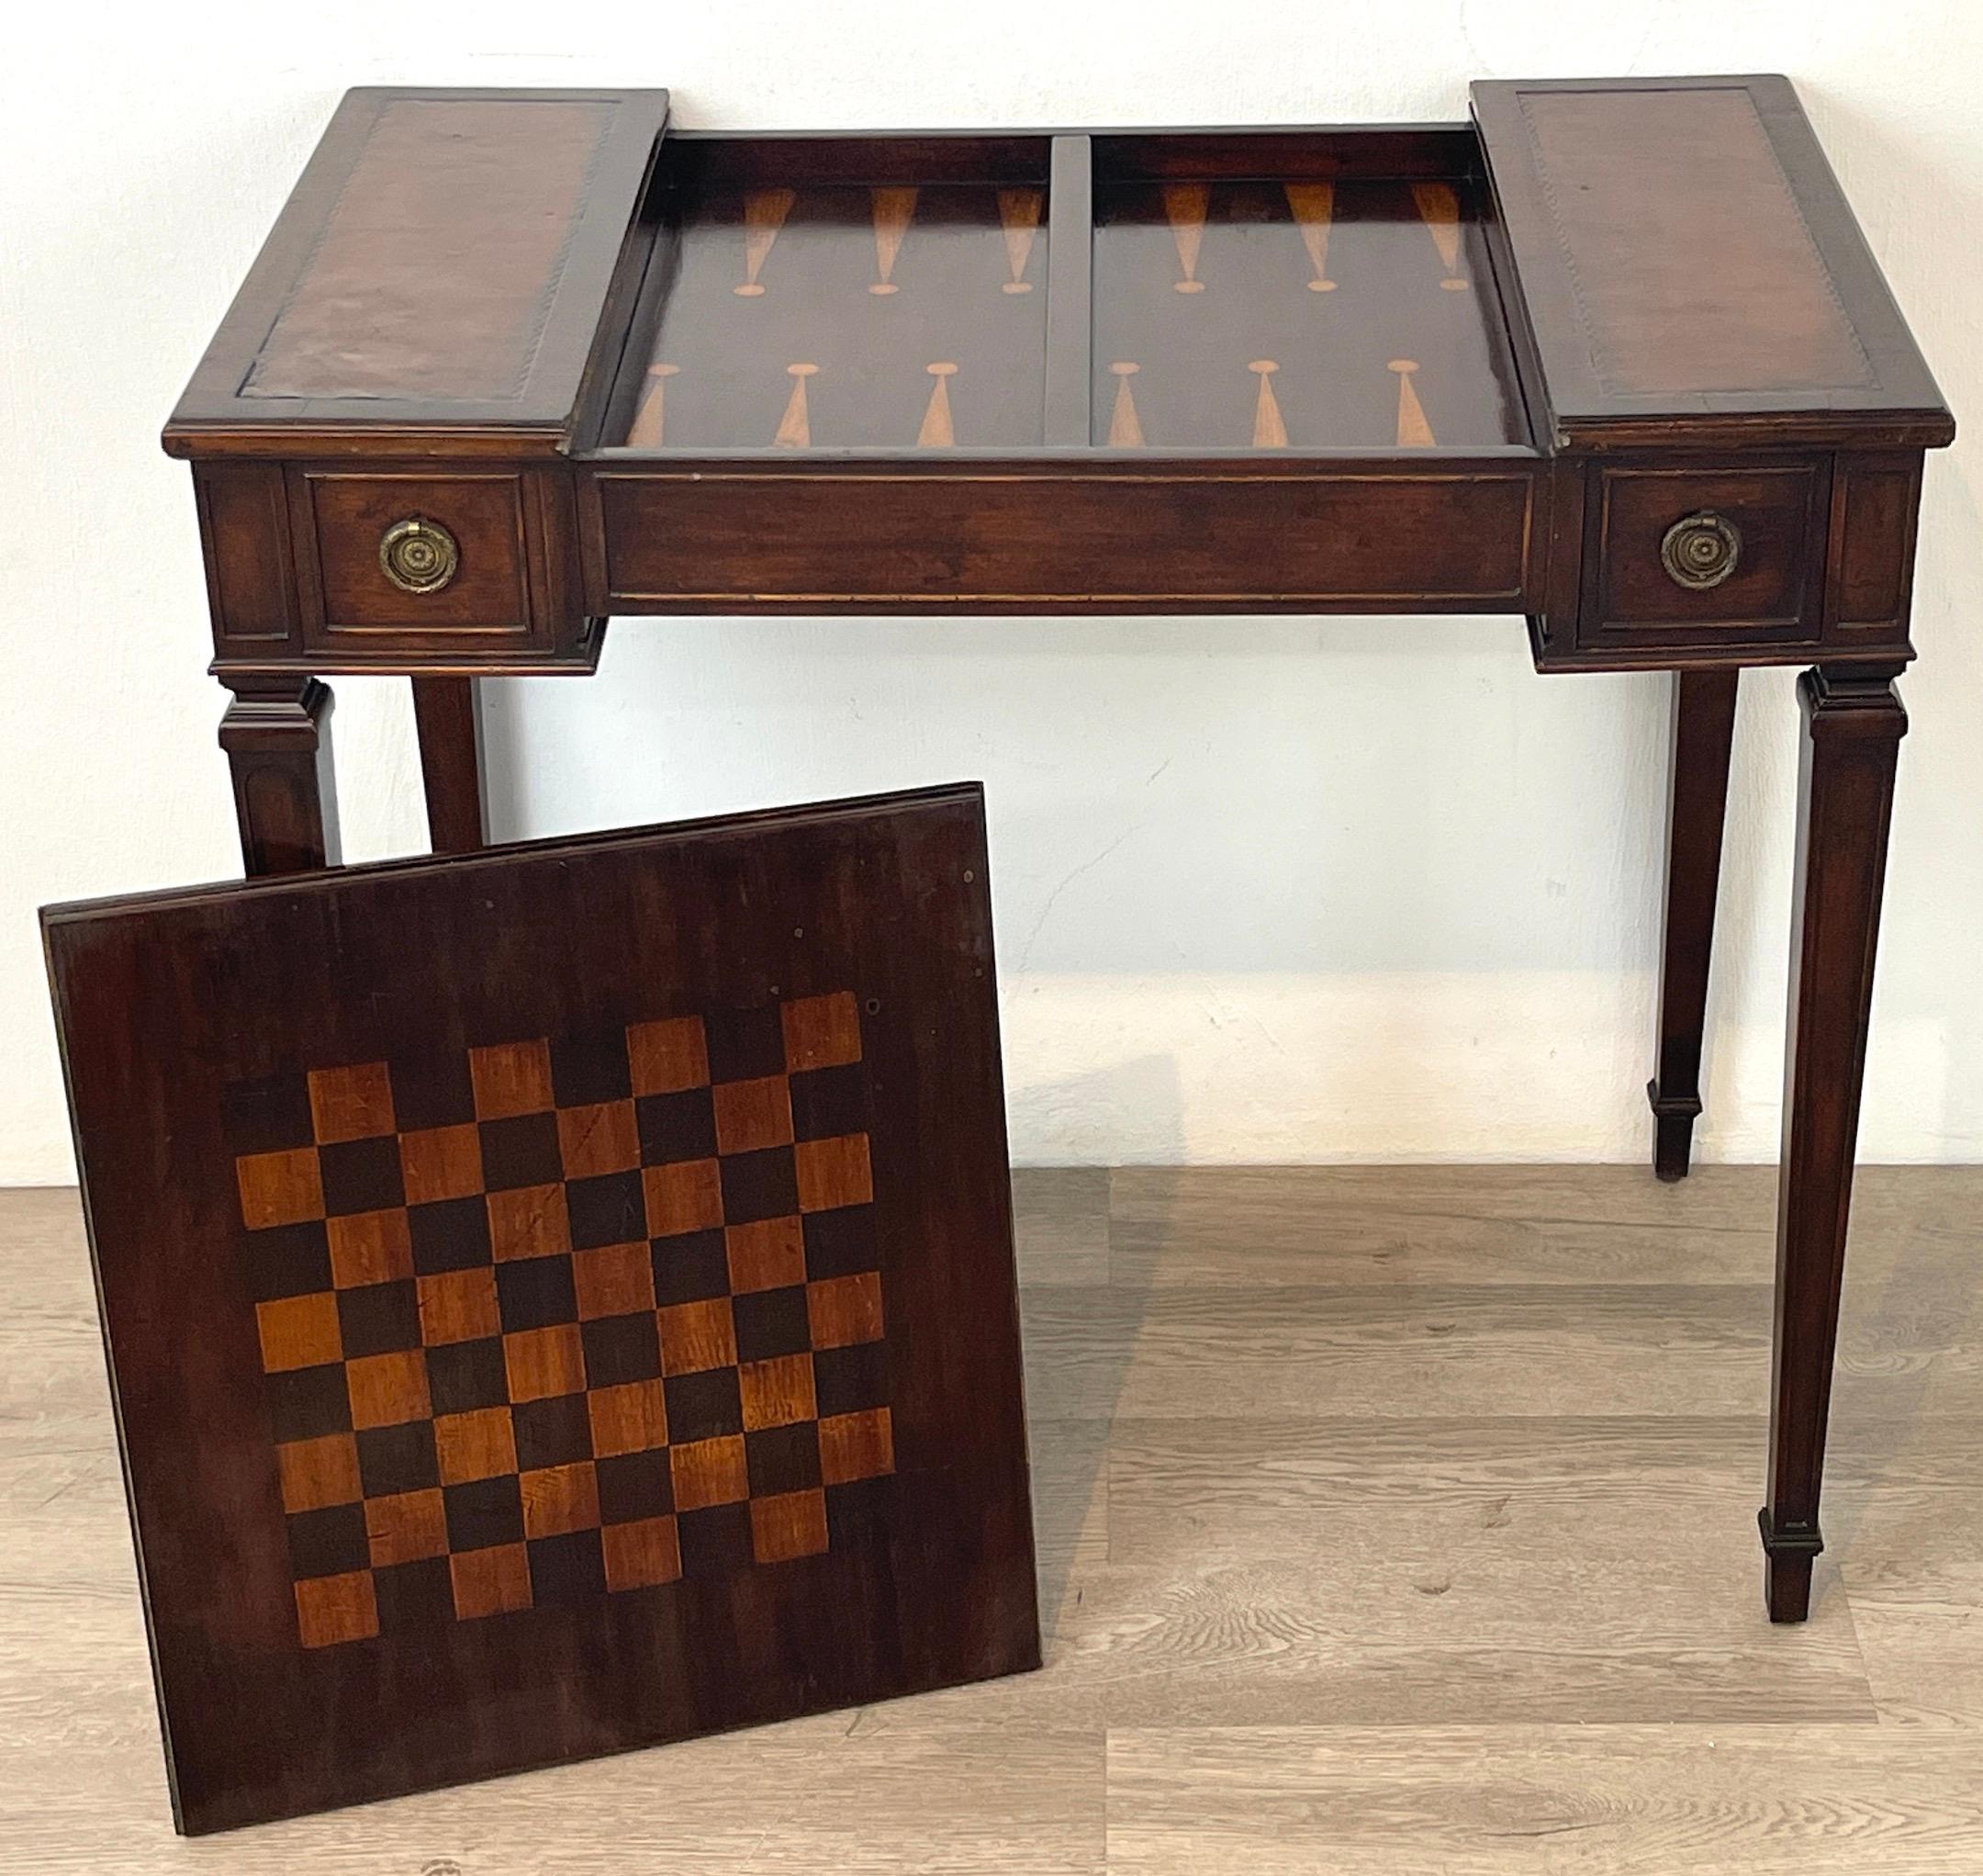 Diminutive French Neoclassical Inlaid Mahogany Games Table In Good Condition For Sale In West Palm Beach, FL